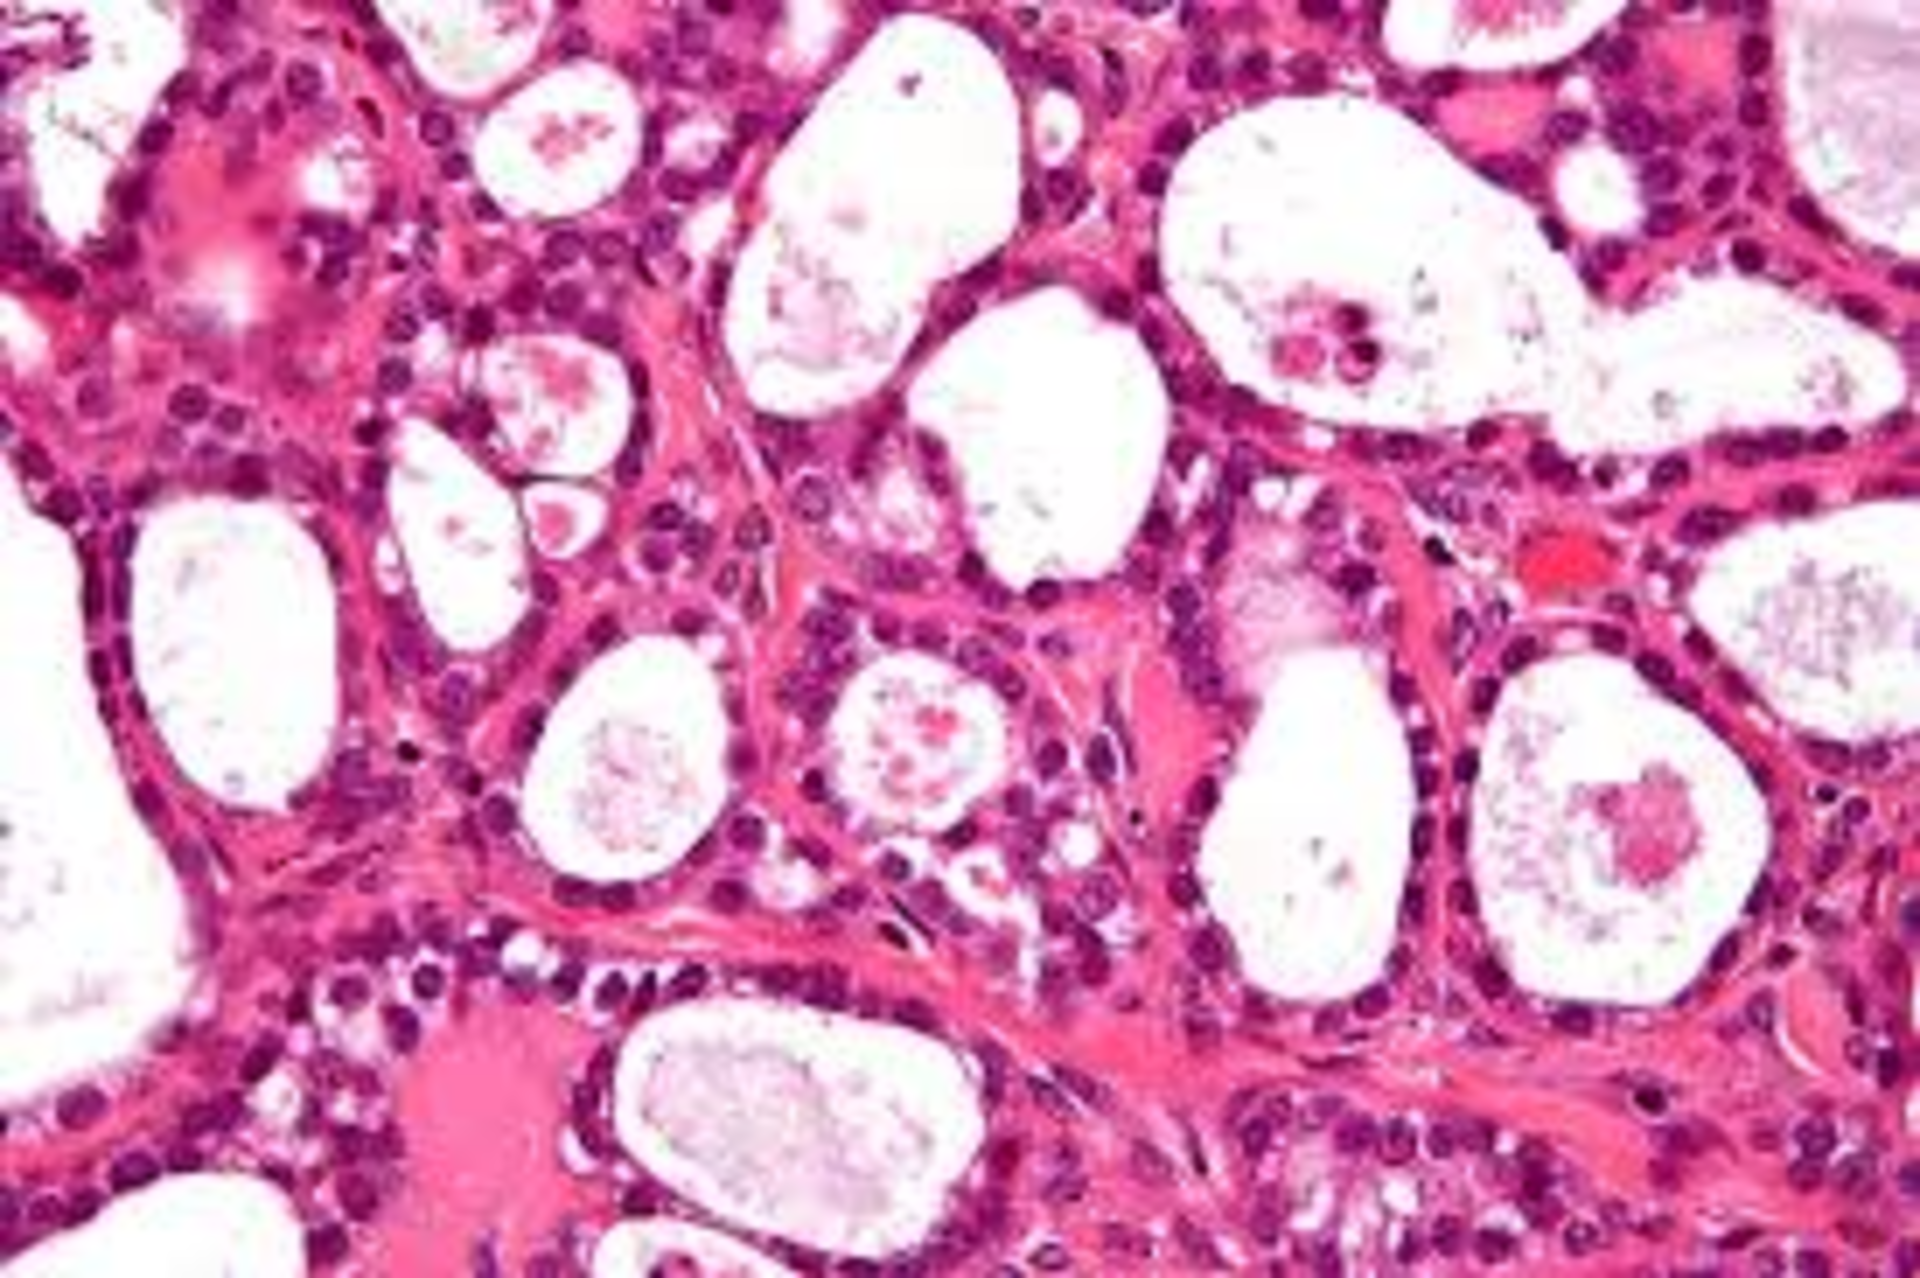 HyperCells will look at Multi Drug Resistance in ovarian cancer cells